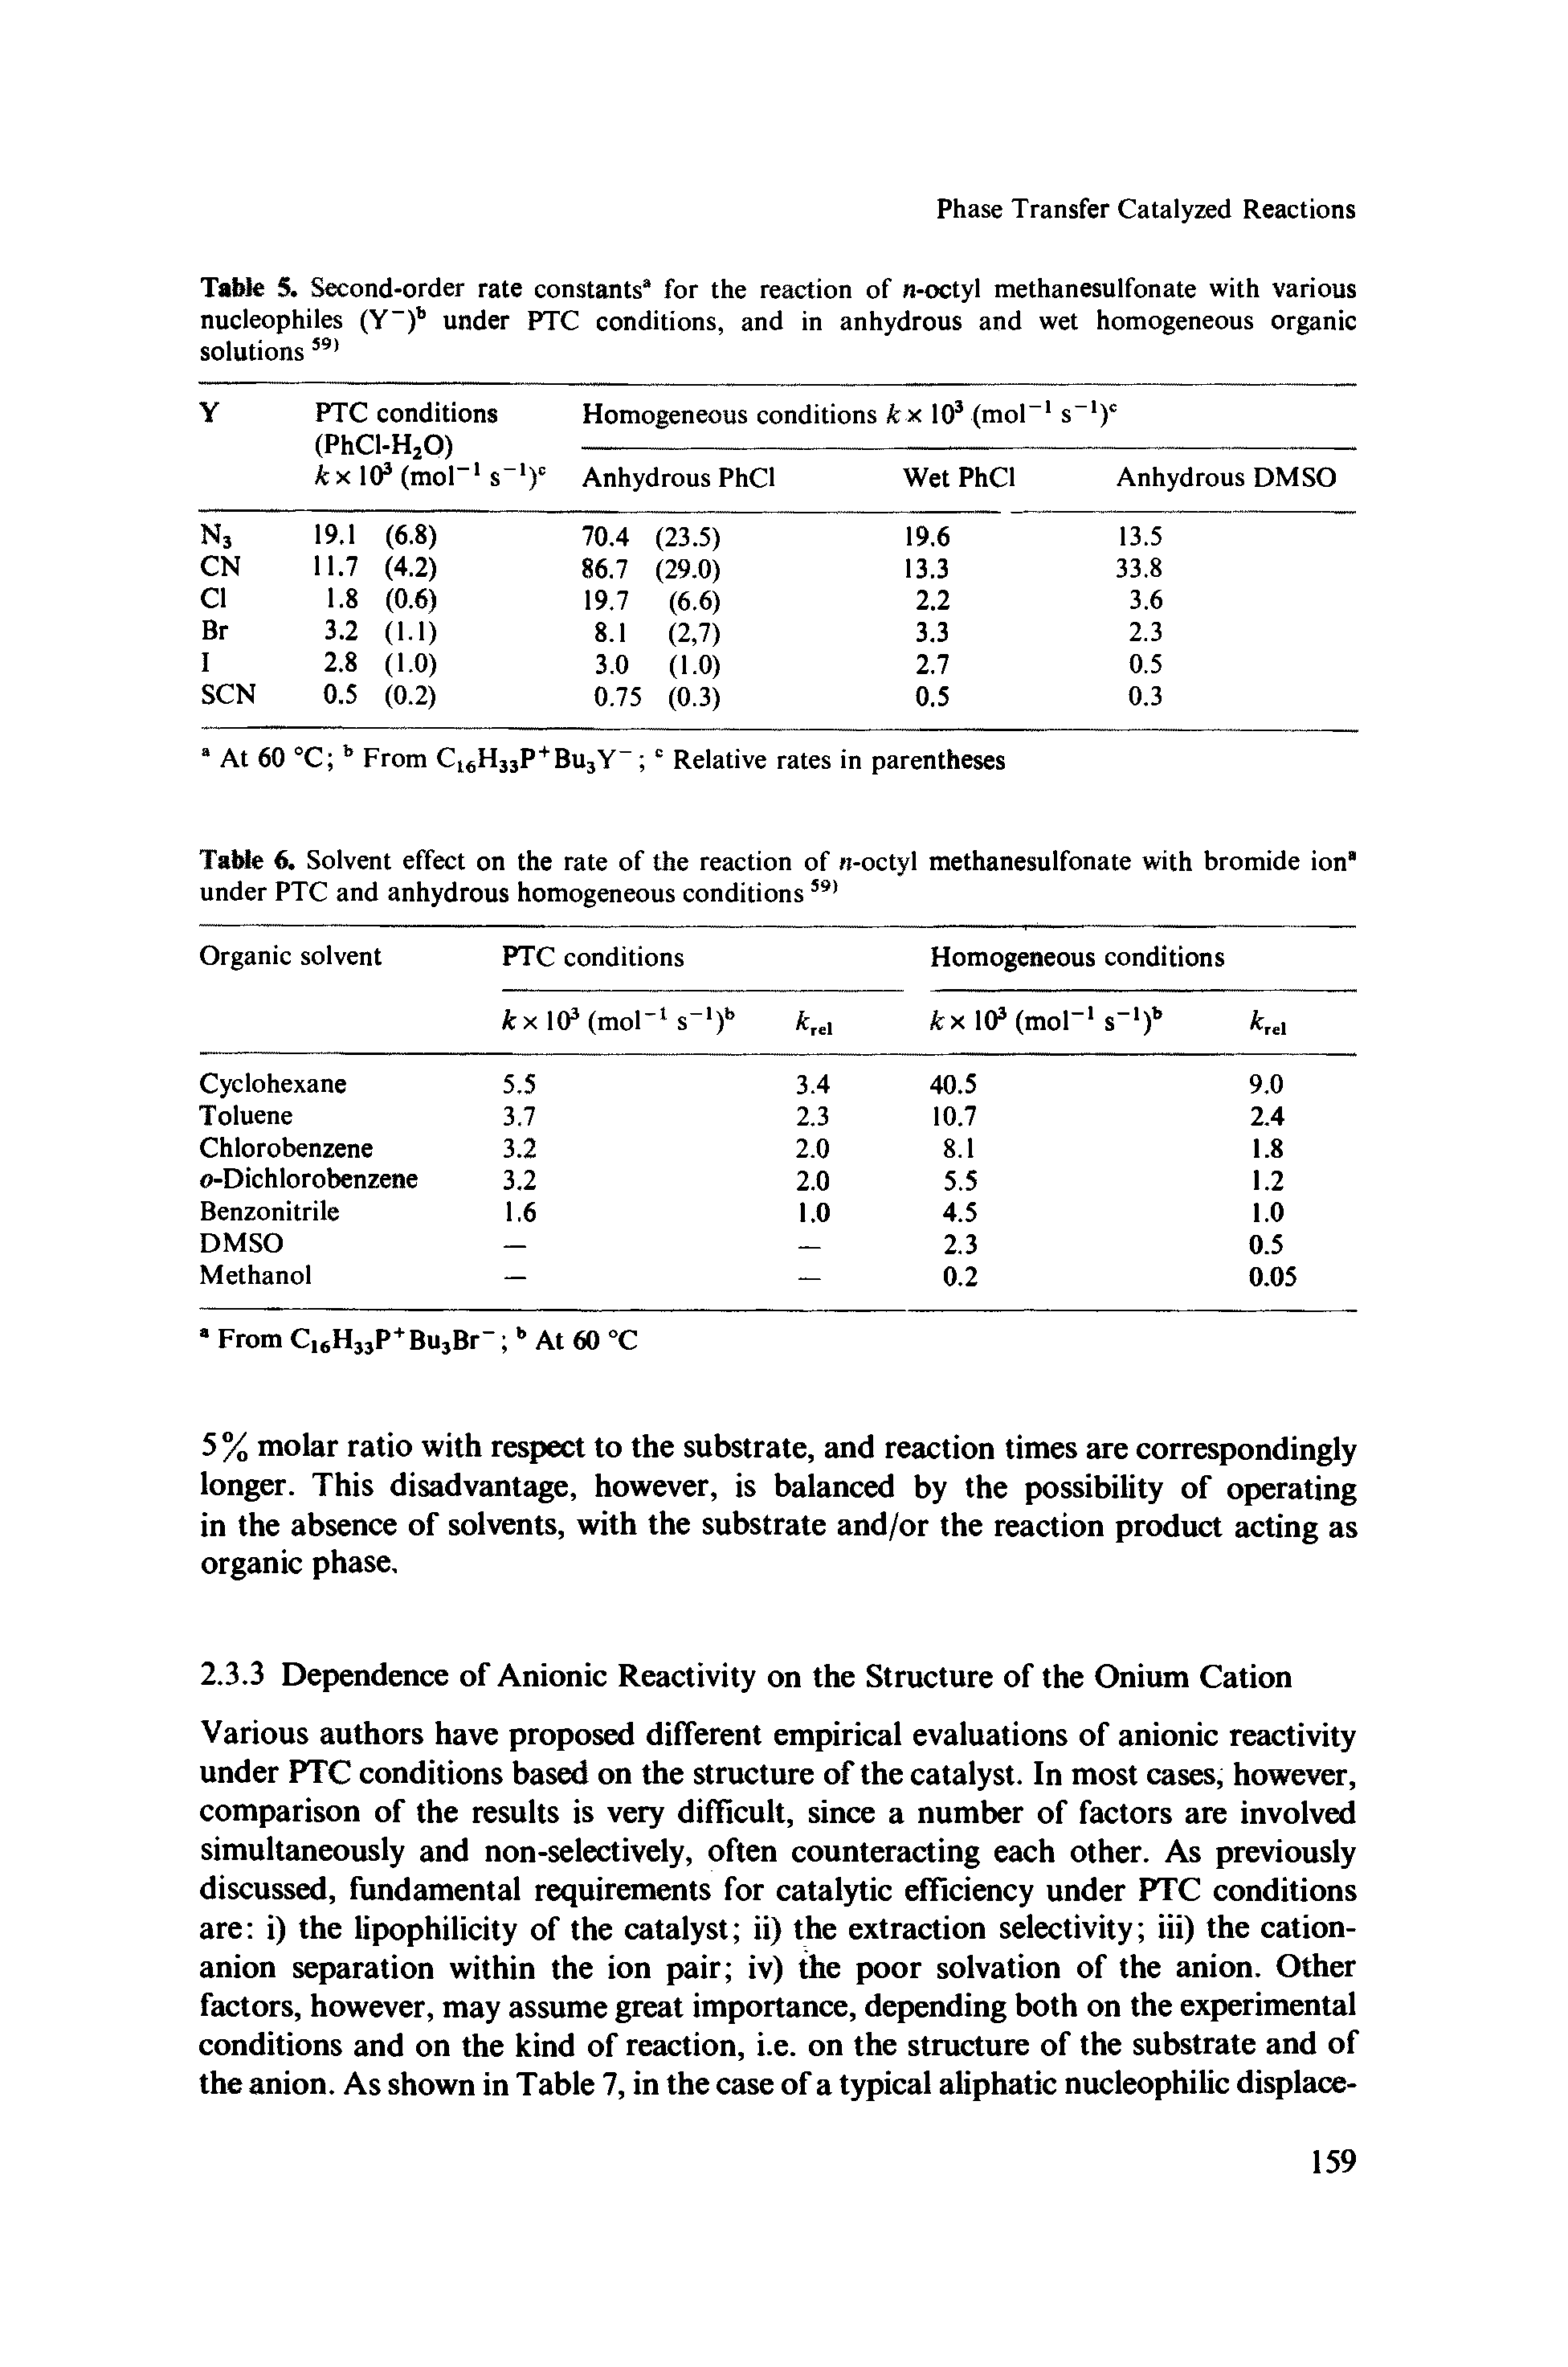 Table 6. Solvent effect on the rate of the reaction of n-octyl methanesulfonate with bromide ion" under PTC and anhydrous homogeneous conditions...